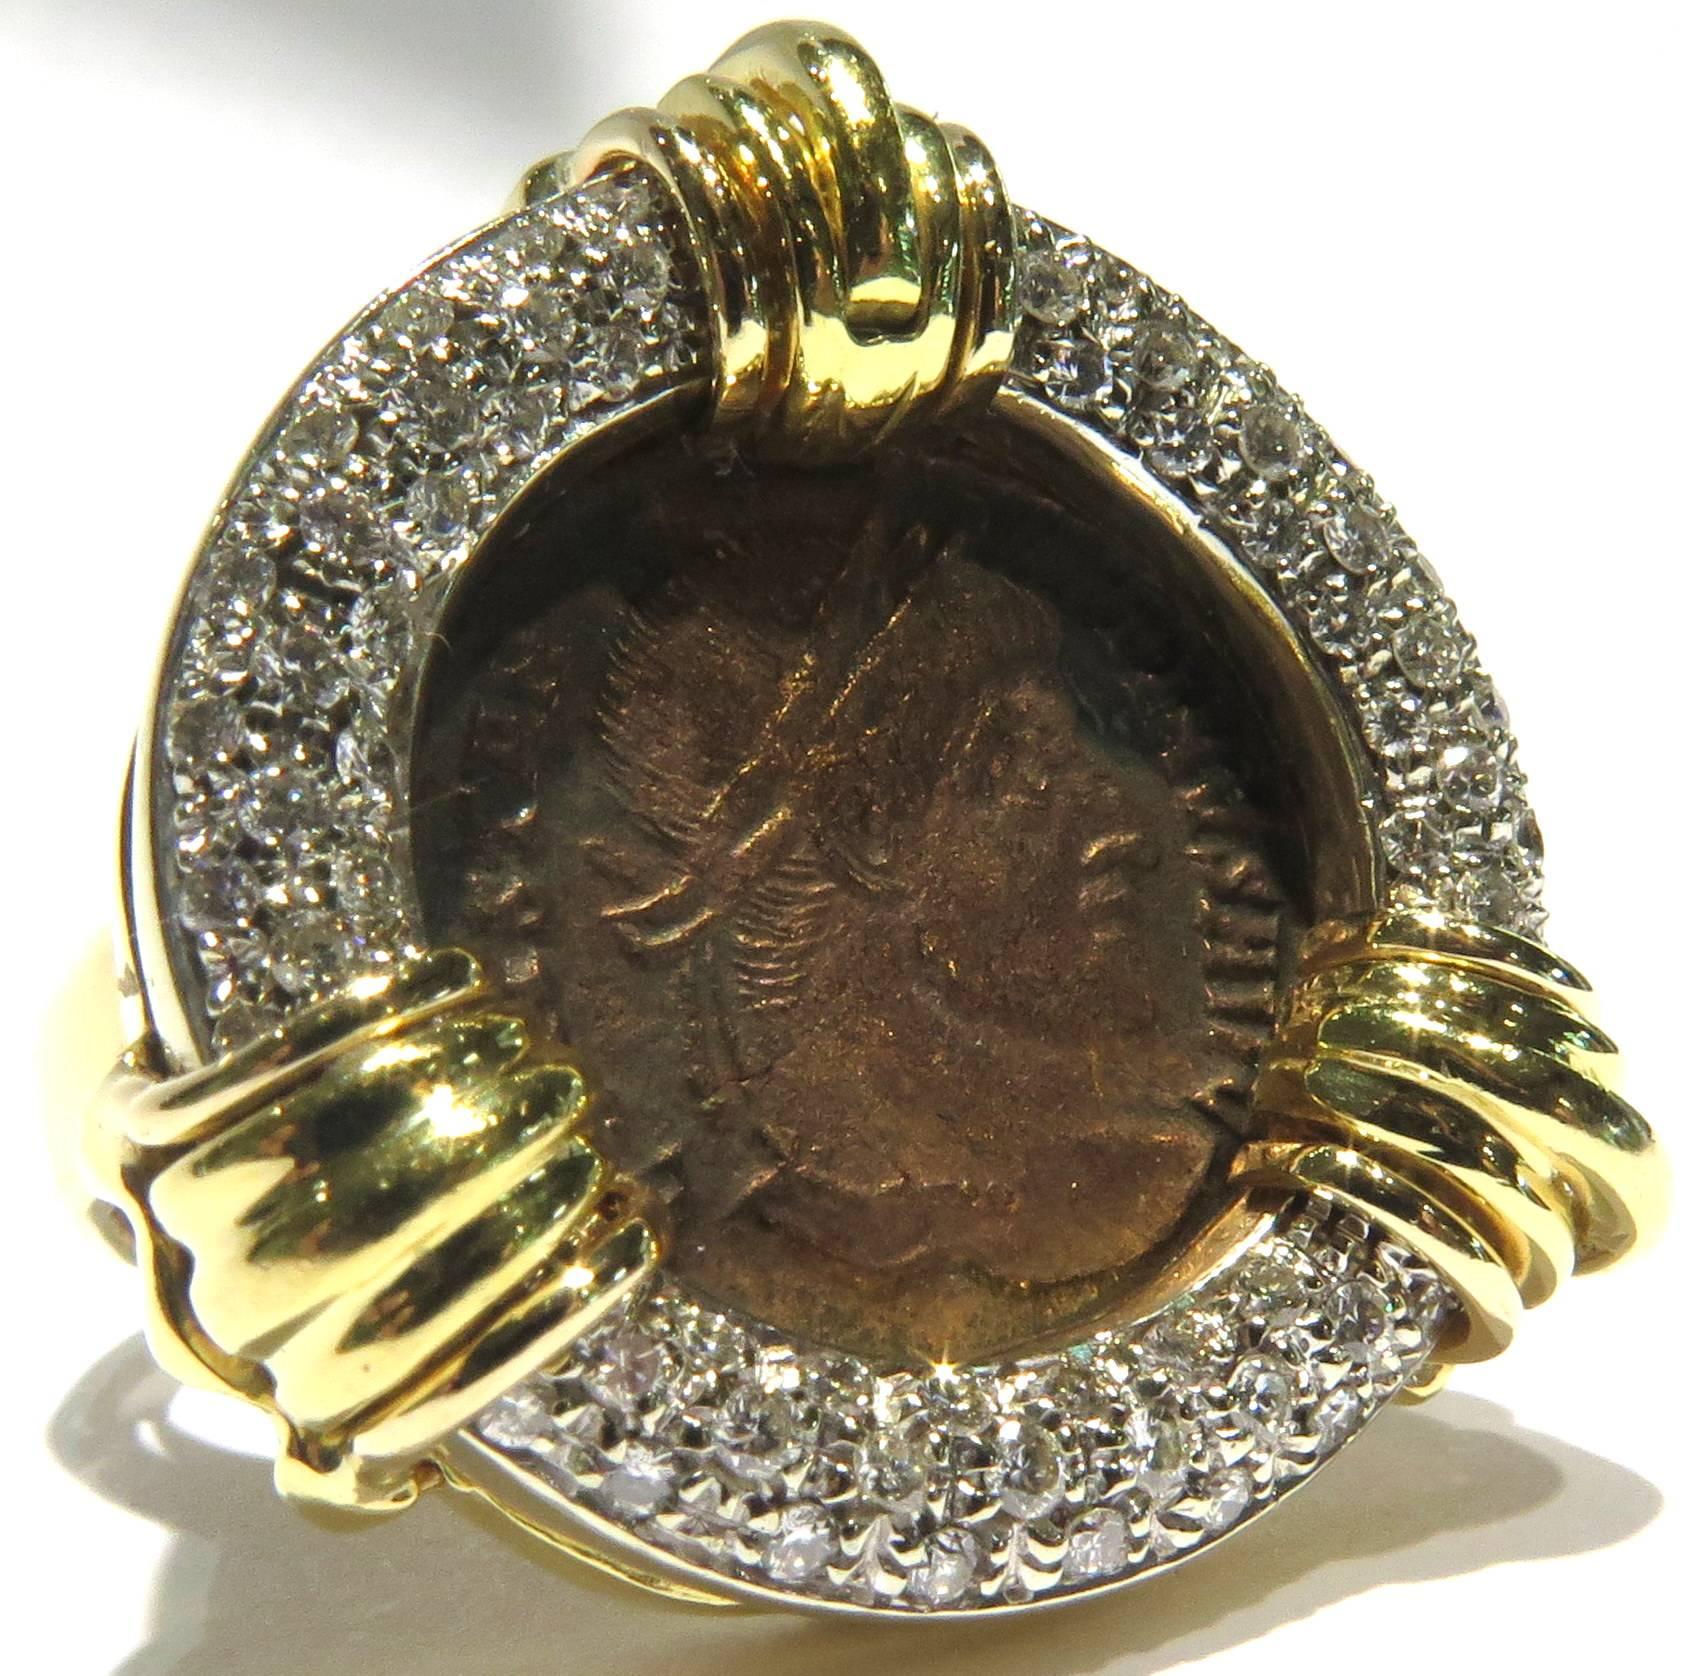 gold coin with diamond bezel